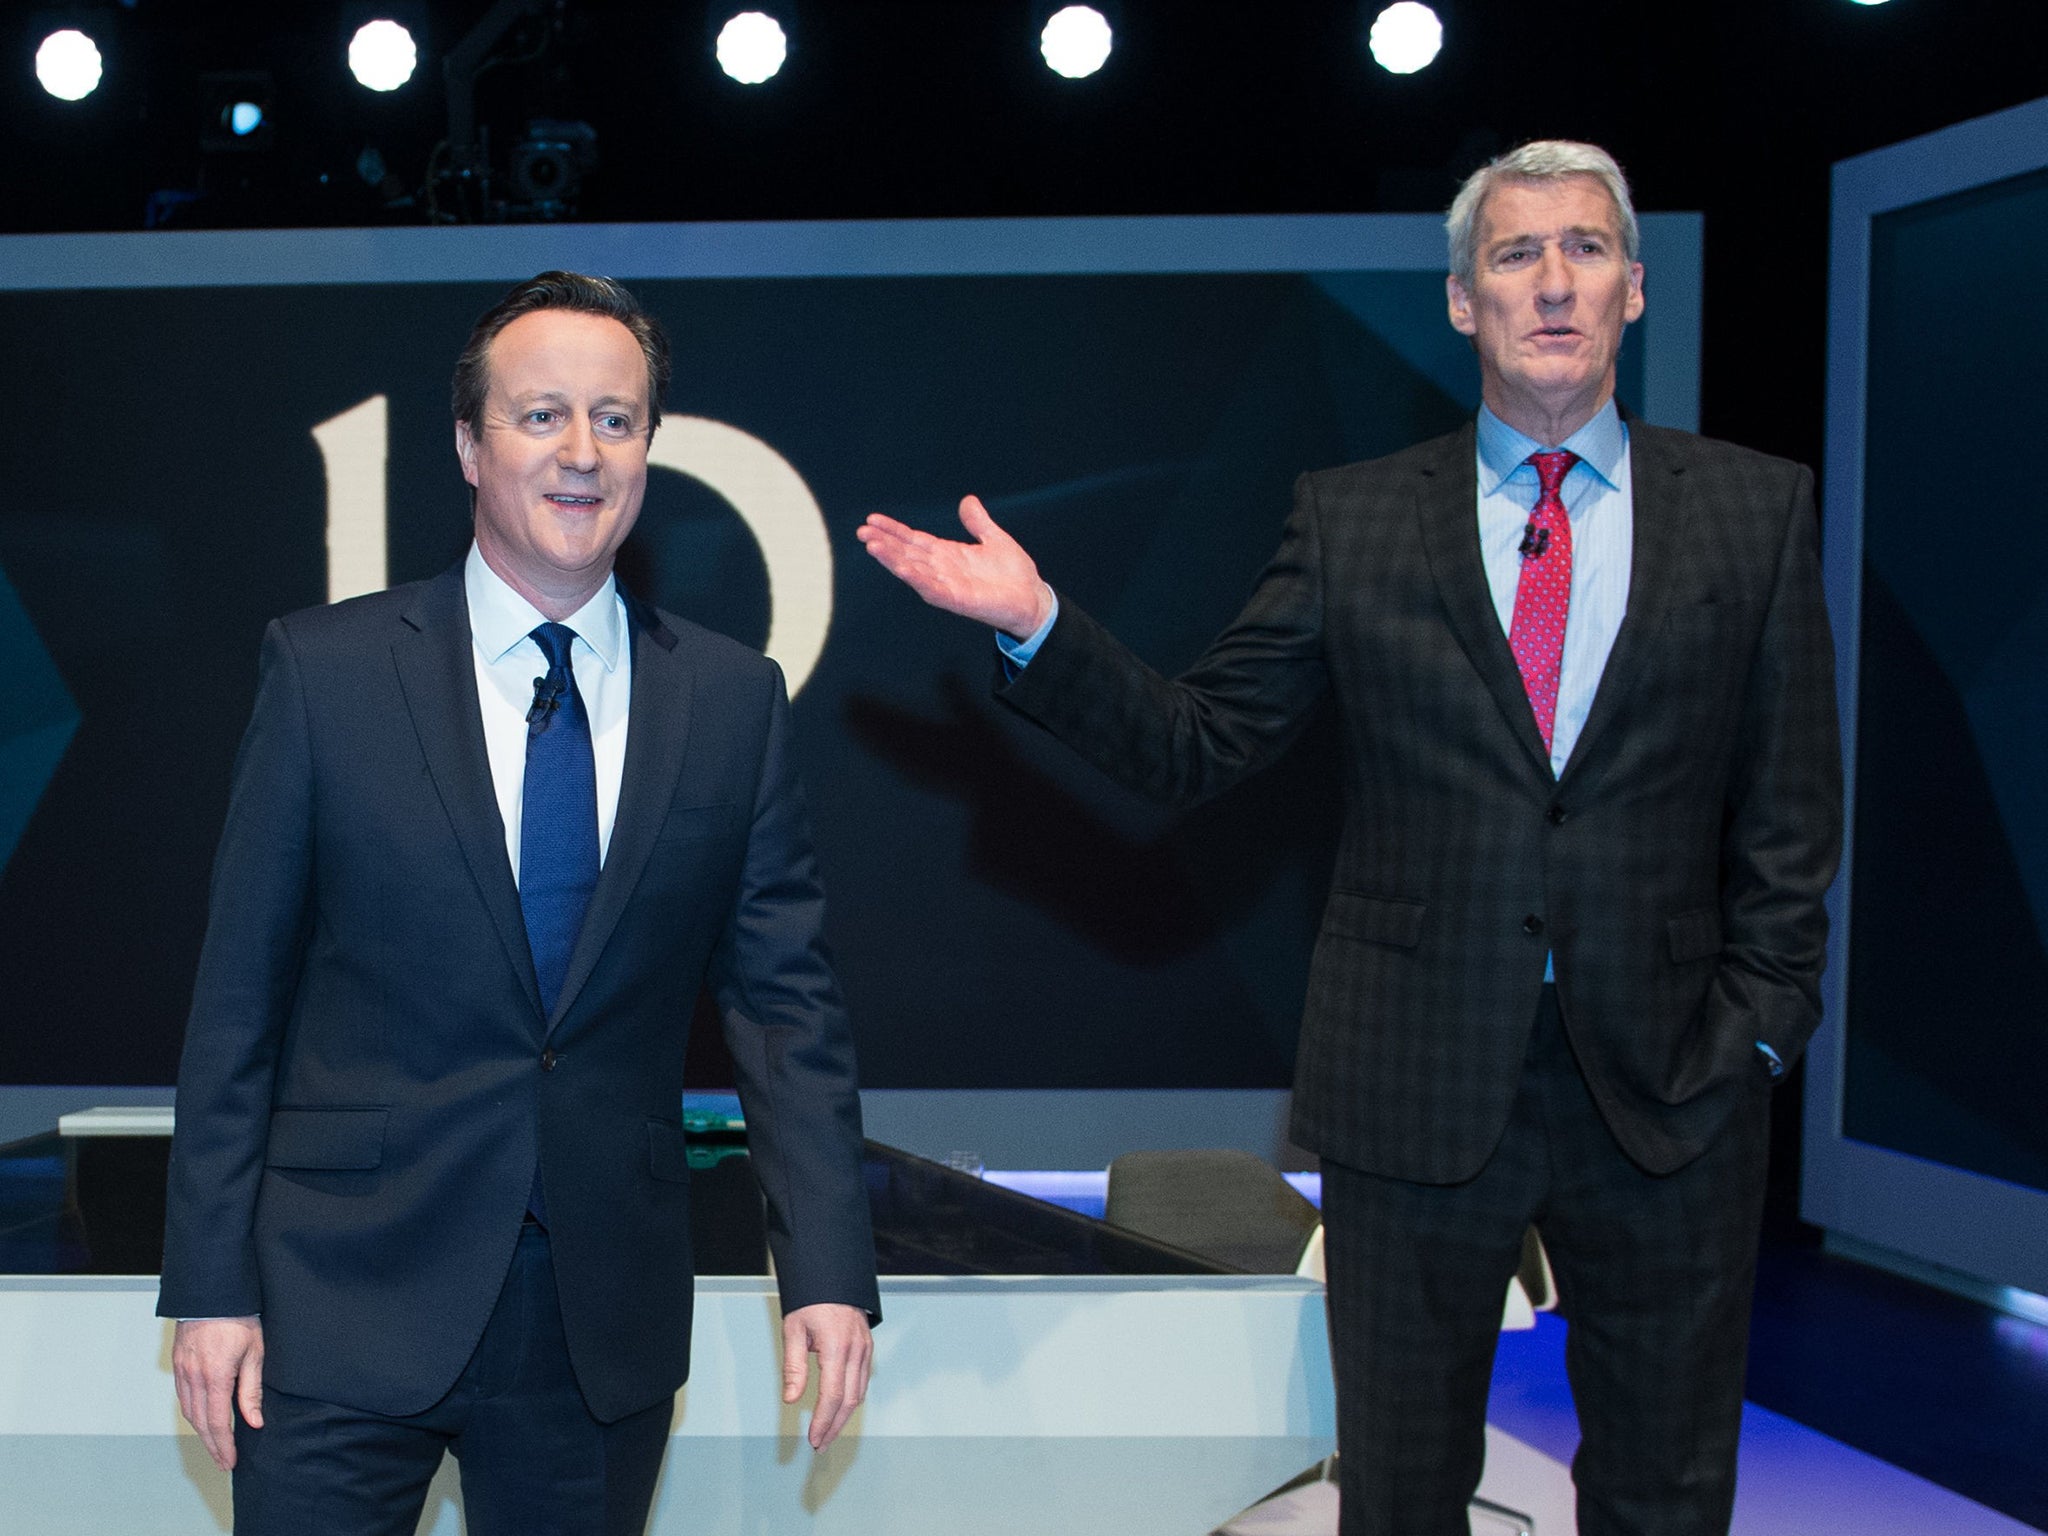 Prime Minister David Cameron is interview by Jeremy Paxman